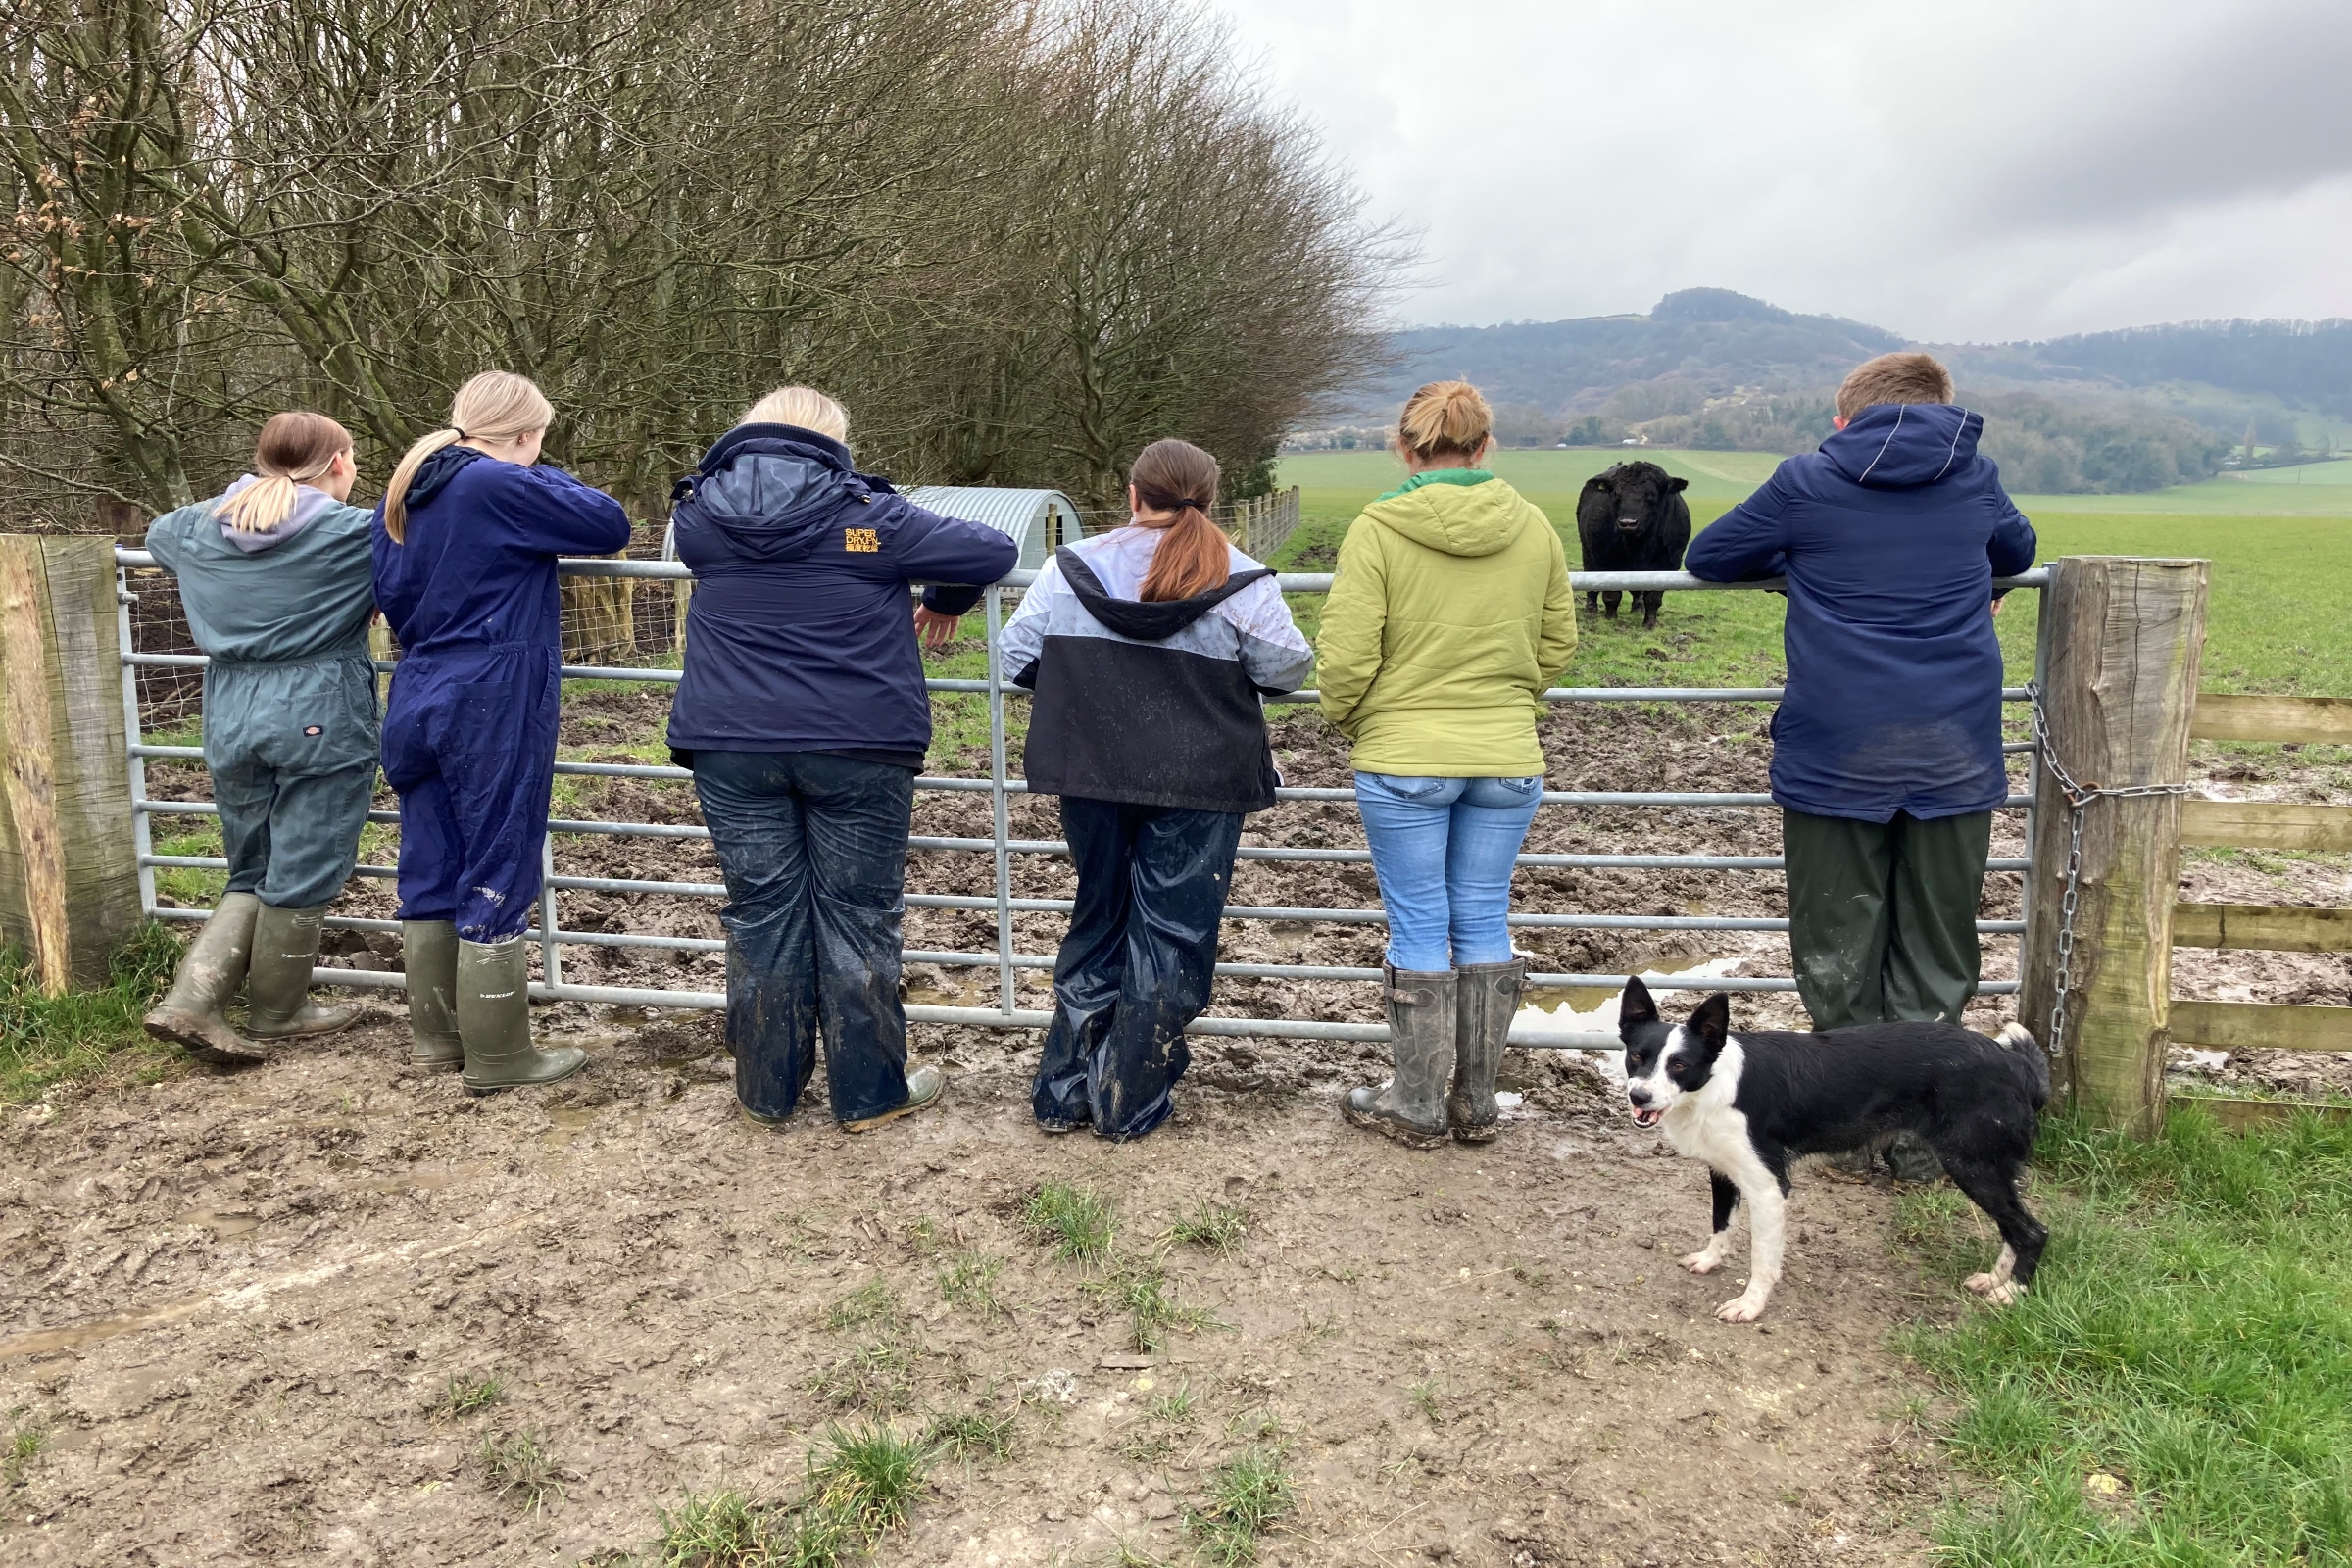 People with their backs turned stood next to a farm gate looking out across the field